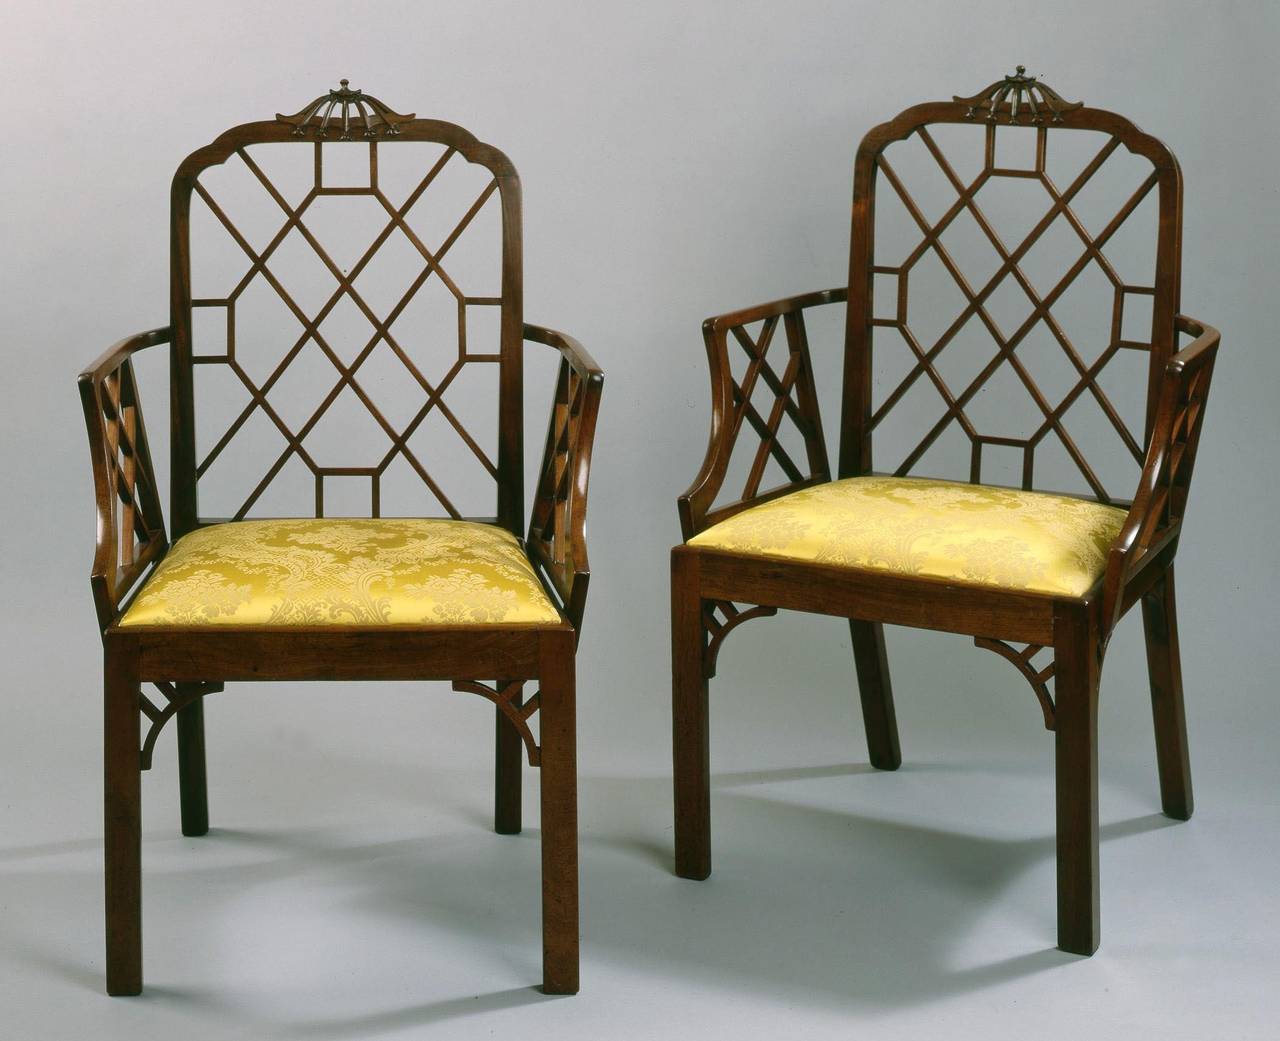 Constructed in mahogany, rising from chamfered square section front legs, decorated with ‘c’ scrolls: the lift out seat upholstered, the arms with lattice work, the back of a ‘spider web’ form, the top rail with a pagoda crest, Bellflowers pendant.